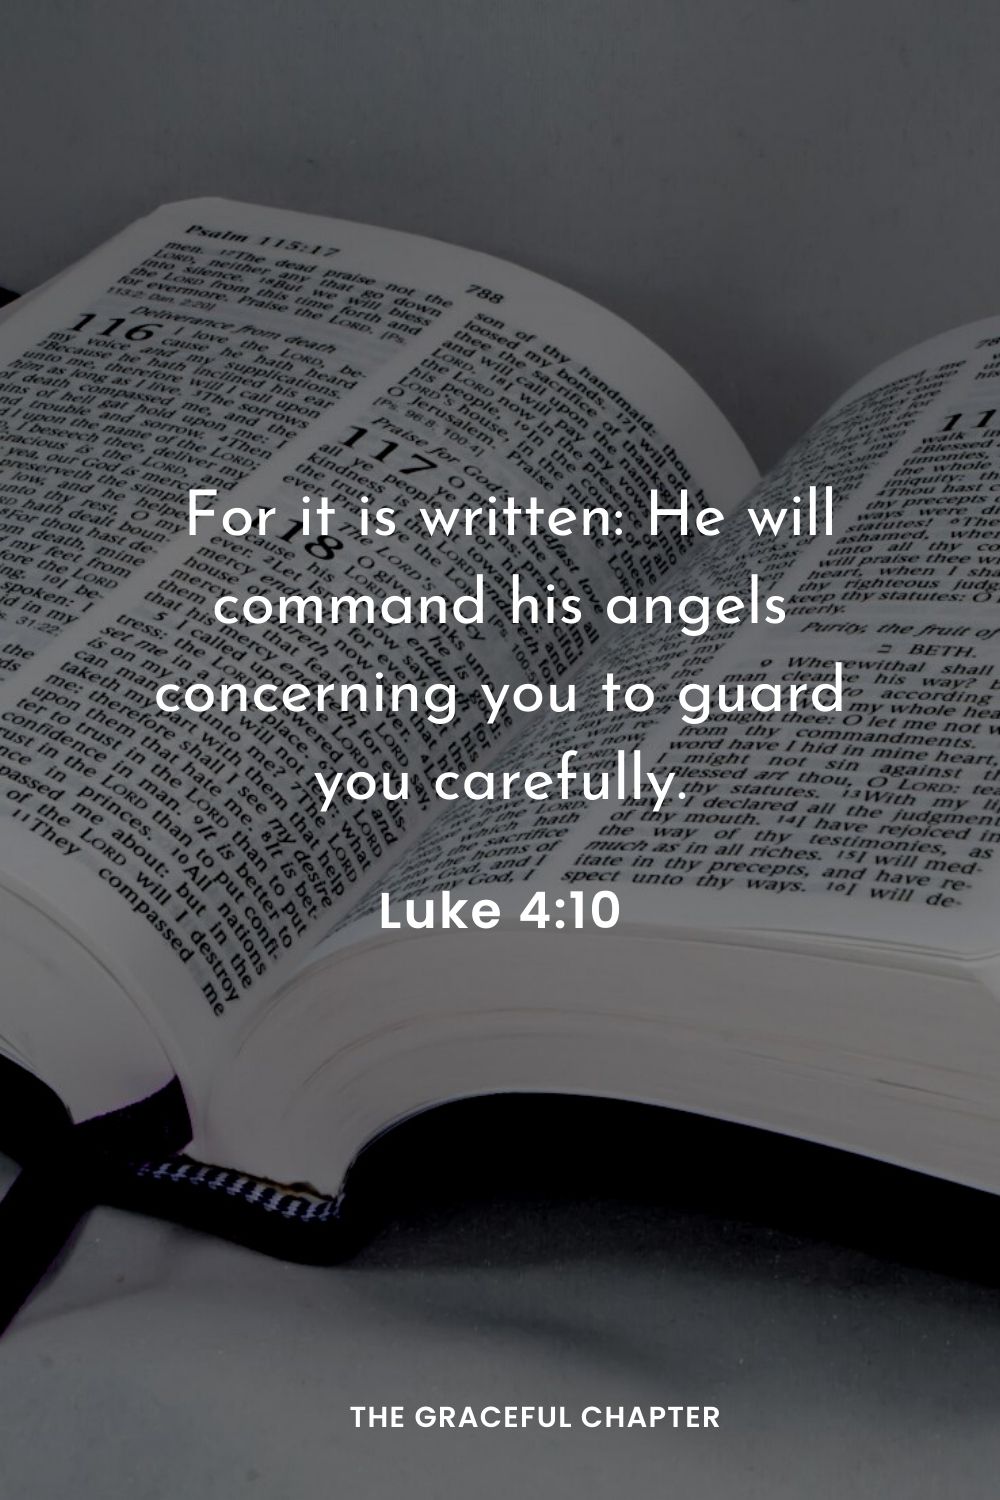  For it is written: He will command his angels concerning you to guard you carefully.